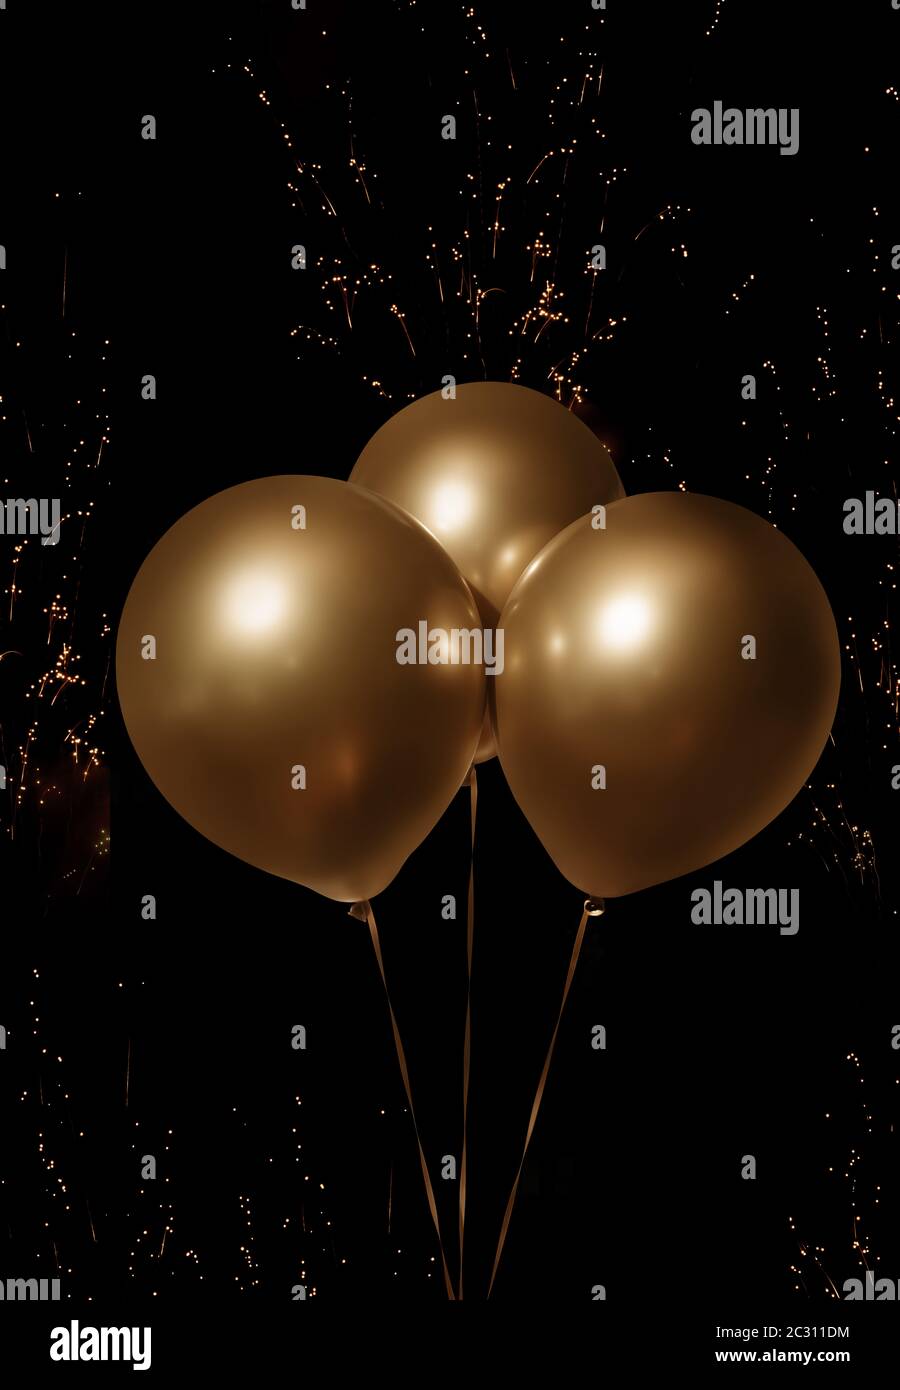 Golden luxury balloons on dark night sky with fireworks and place for celebratory text Stock Photo